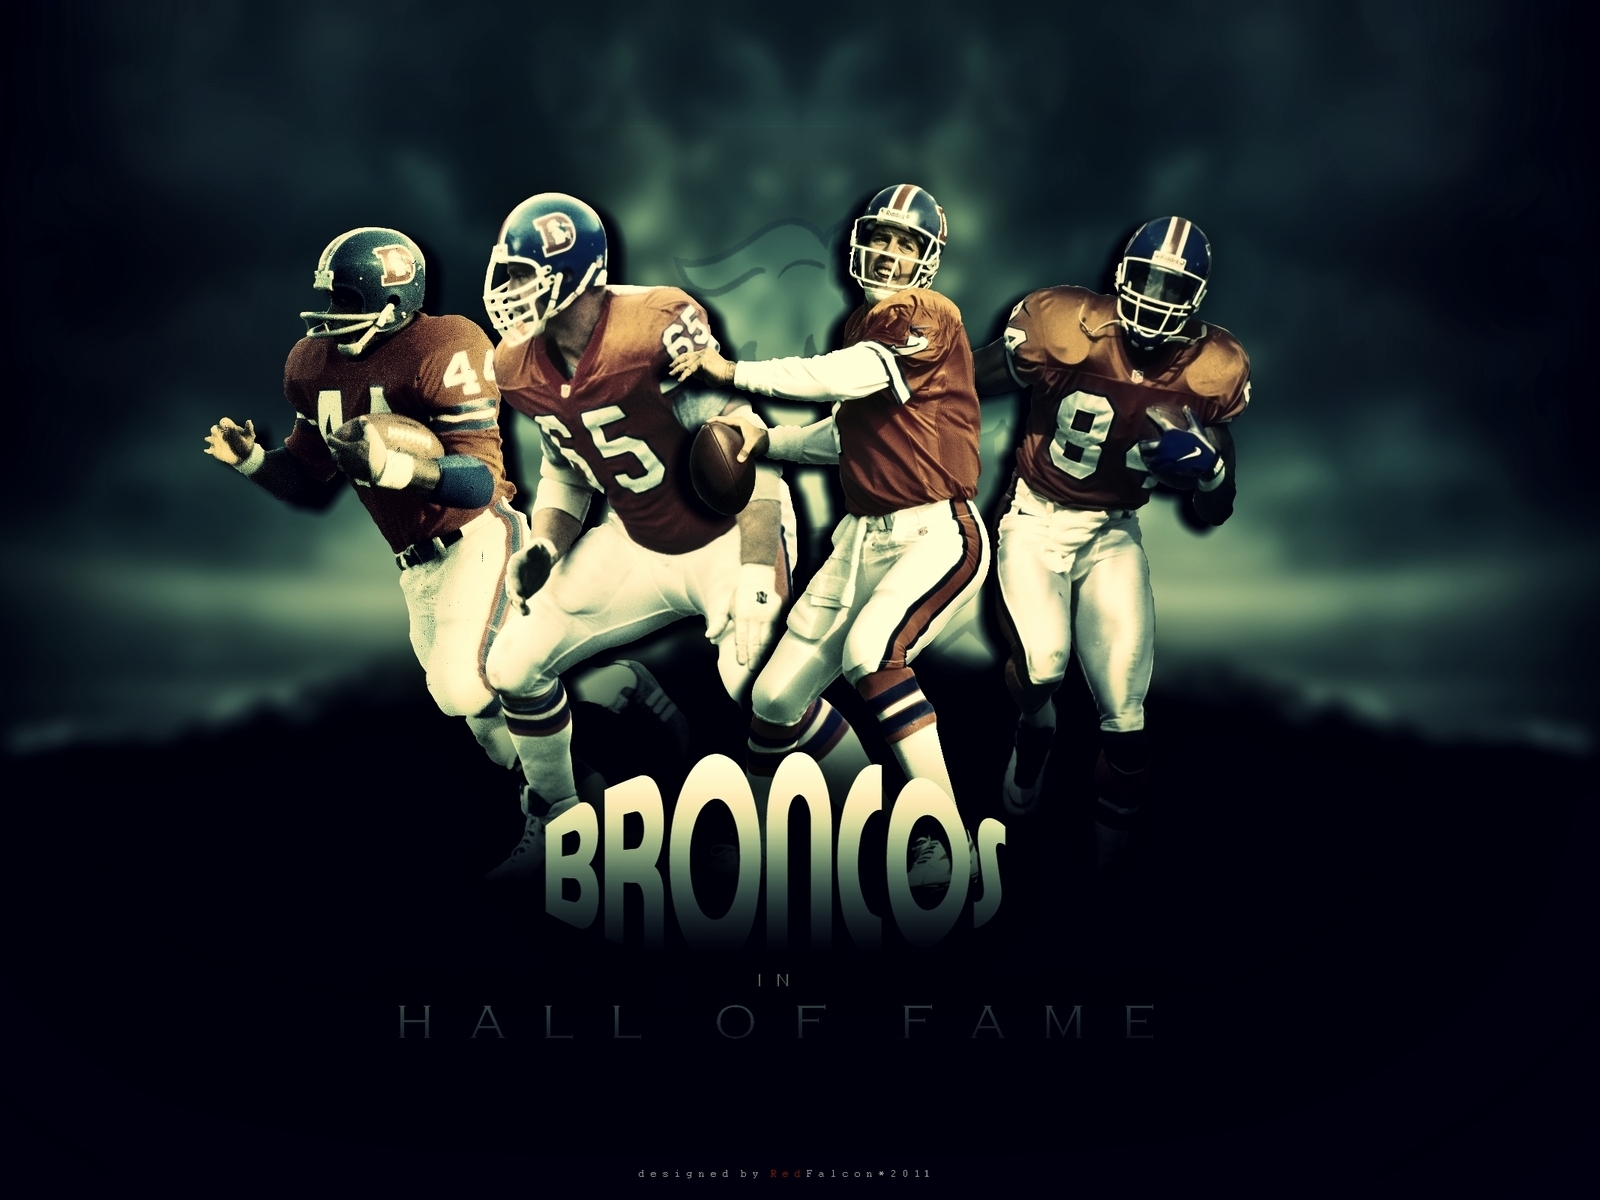 Broncos Hall of Fame for 1600 x 1200 resolution